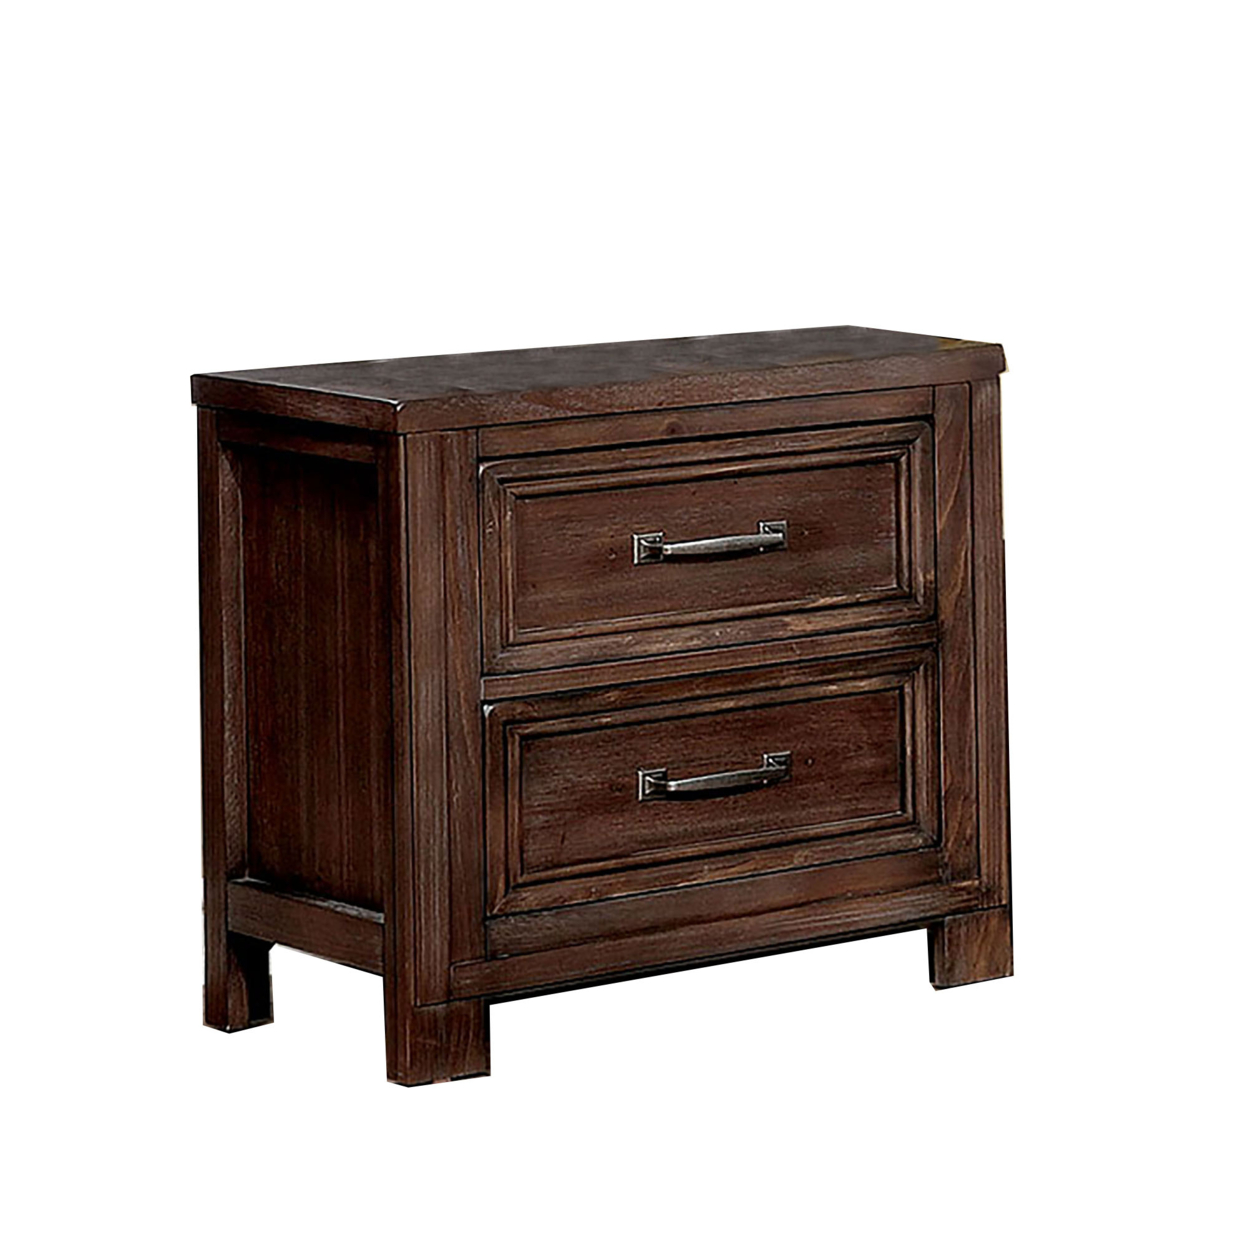 2 Drawer Transitional Style Wooden Nightstand With Molded Trim, Brown- Saltoro Sherpi